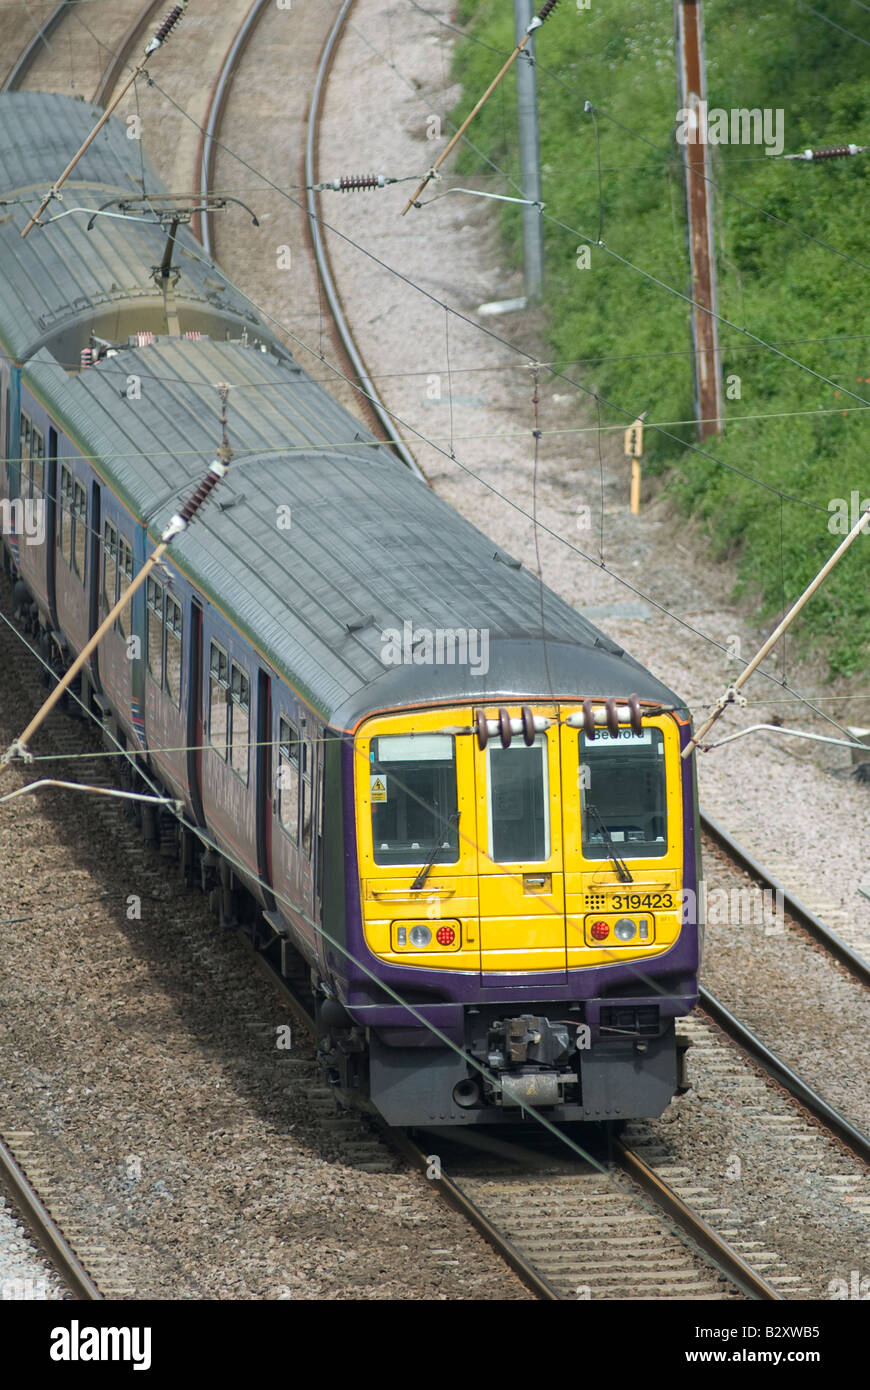 class 319 train in first capital connect livery travelling beneath catenary in the uk Stock Photo